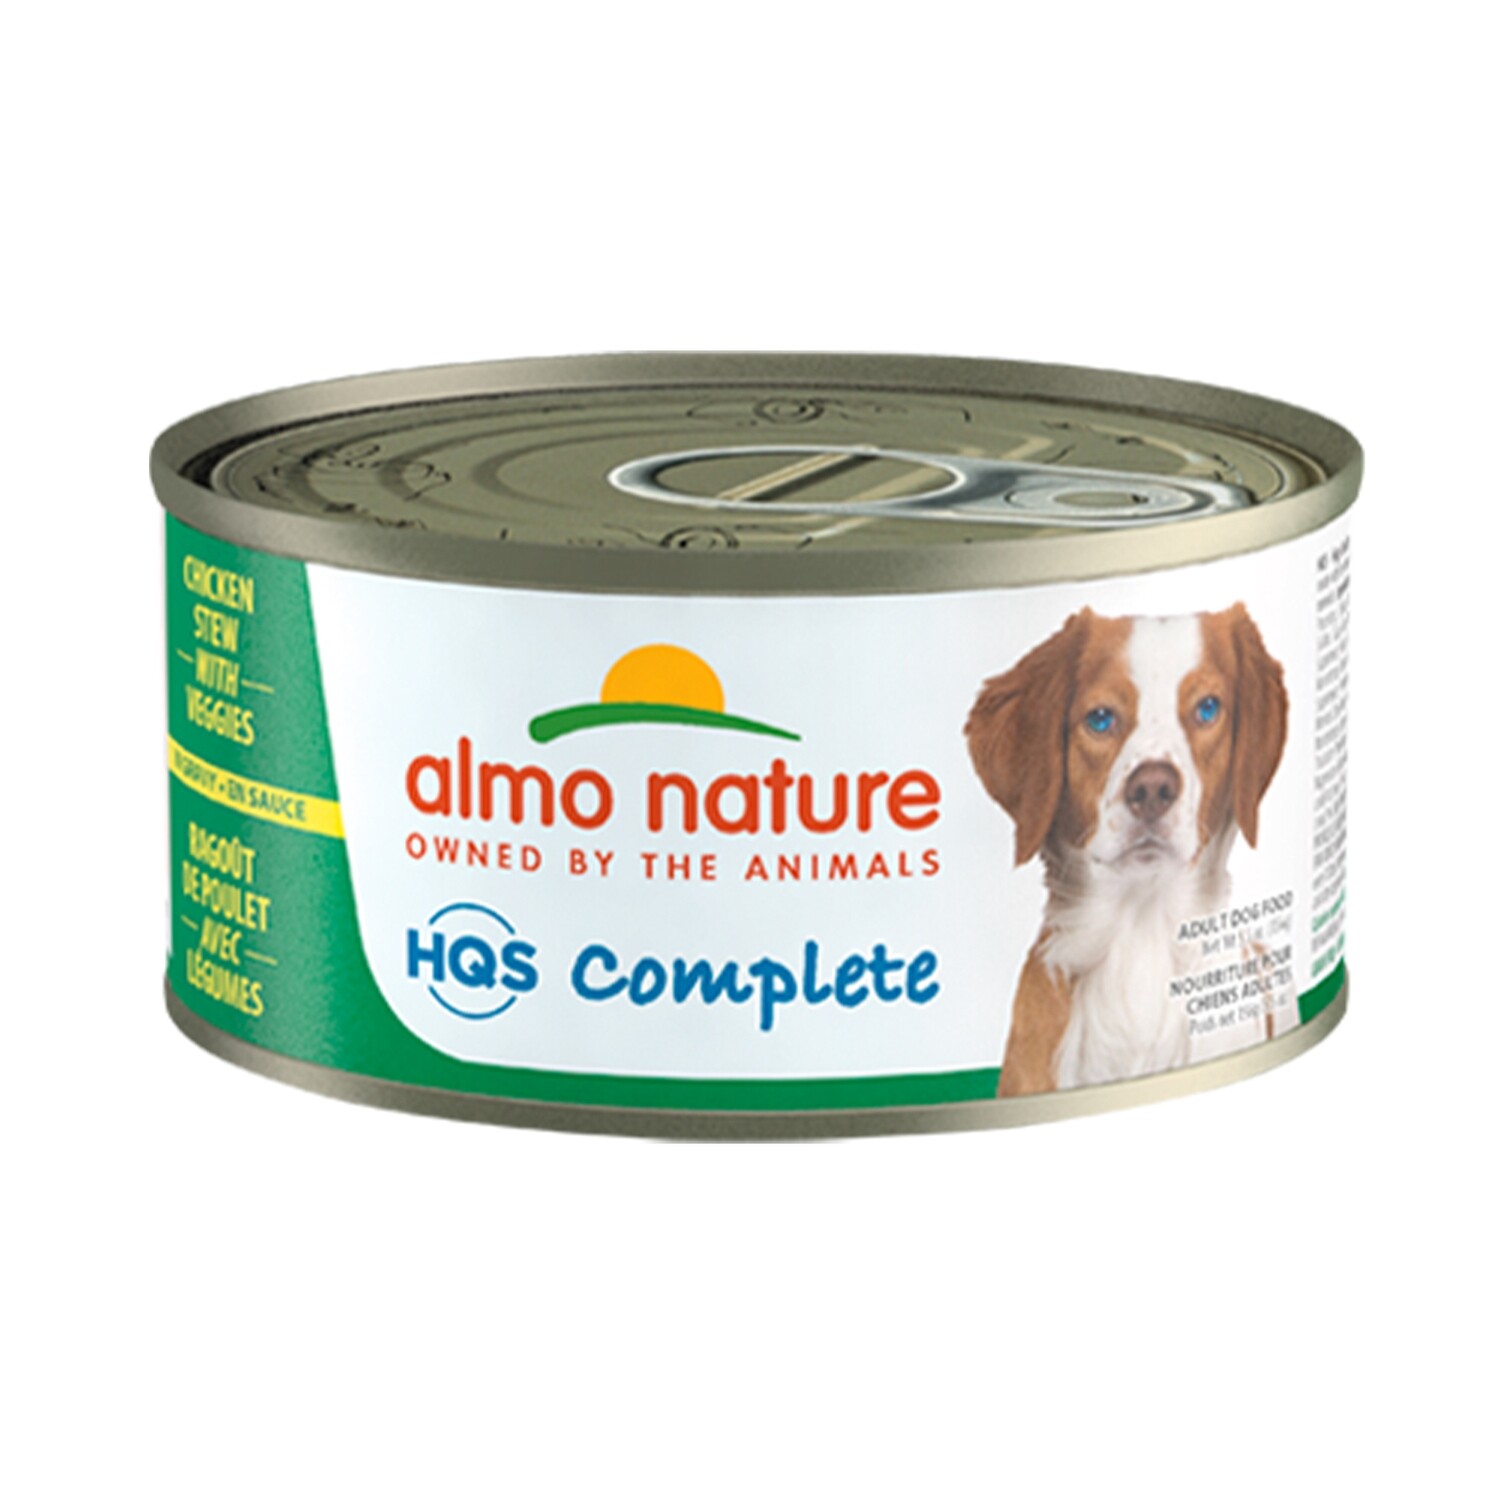 Almo Nature HQS Complete Chicken Stew with Veggies Canned Dog Food-156g/5.5oz - 鸡肉蔬菜狗罐头